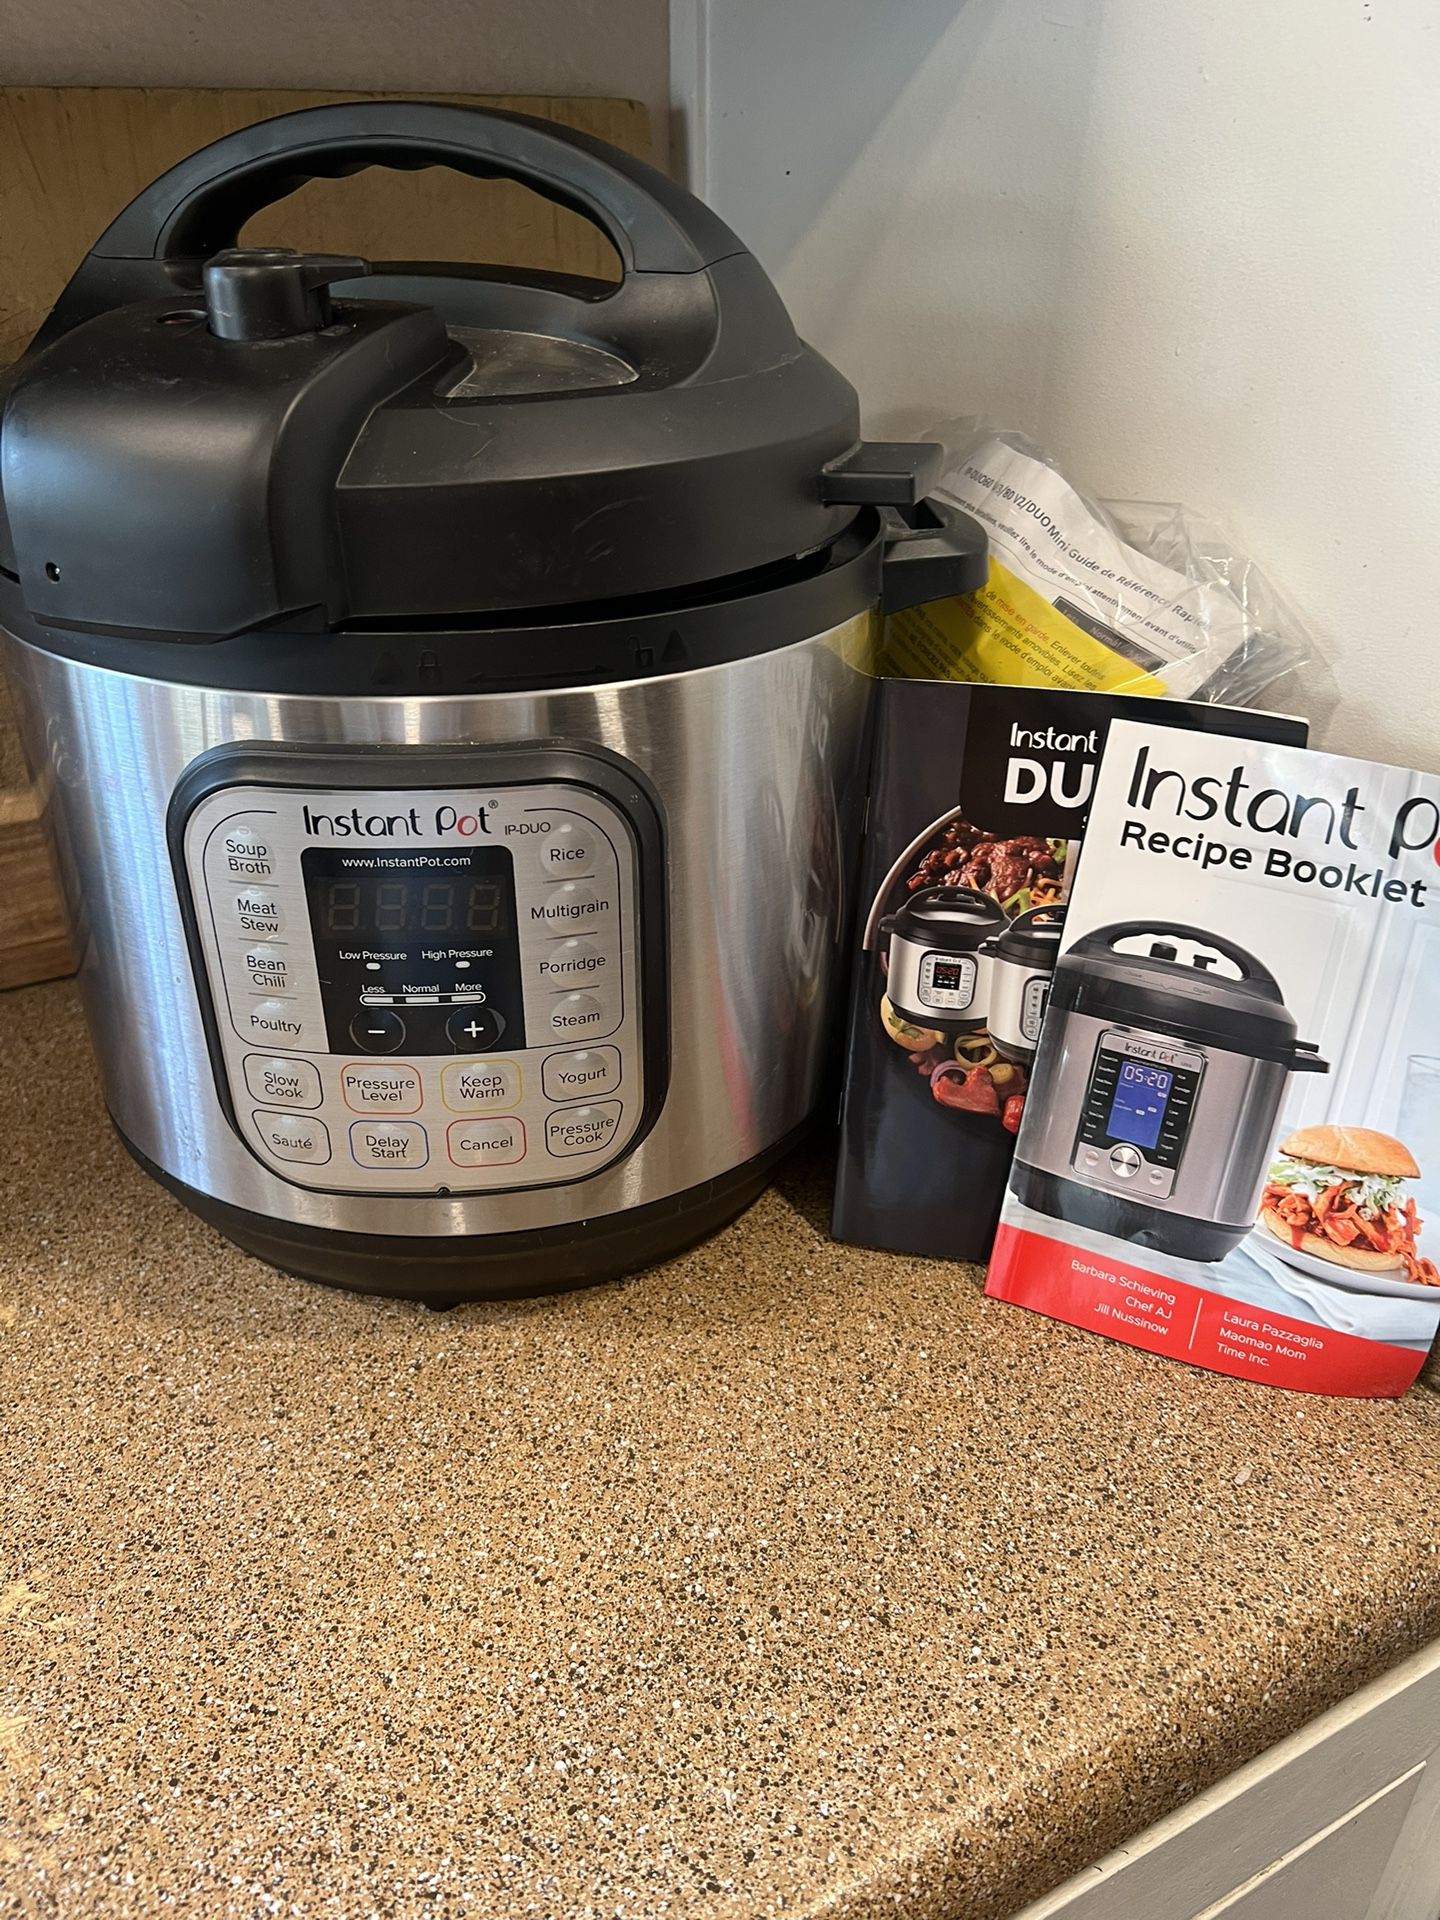 Brand new Never Used  Instant Pot Dual series